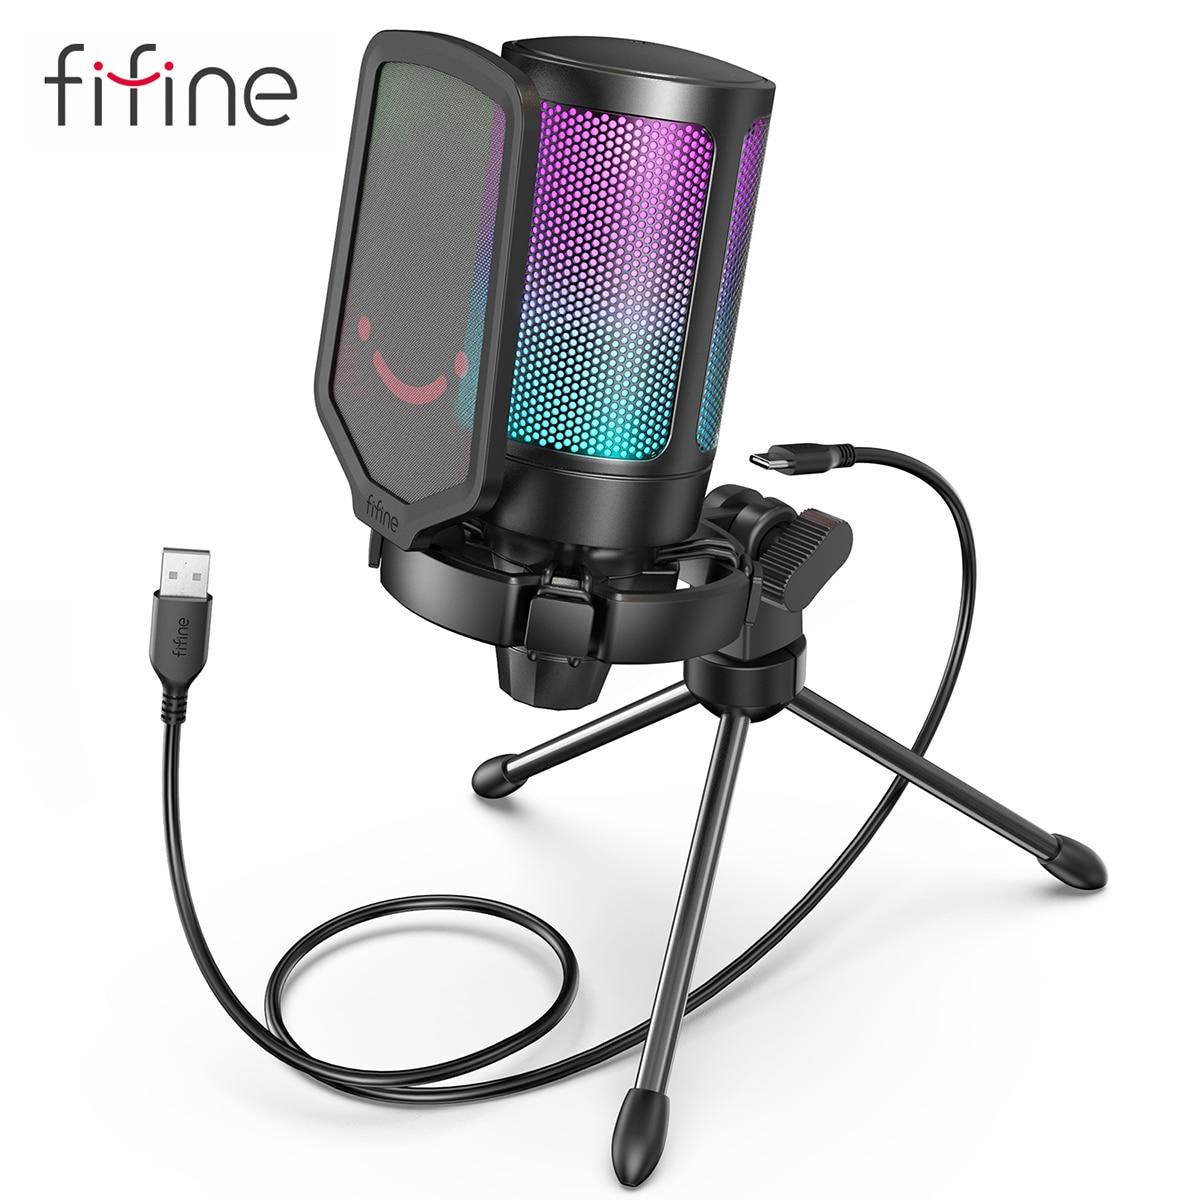 FIFINE-Ampligame-USB-Microphone-for-Gaming-Streaming-with-Pop-Filter-Shock-Mount-Gain-Control-Condenser-Mic.jpg